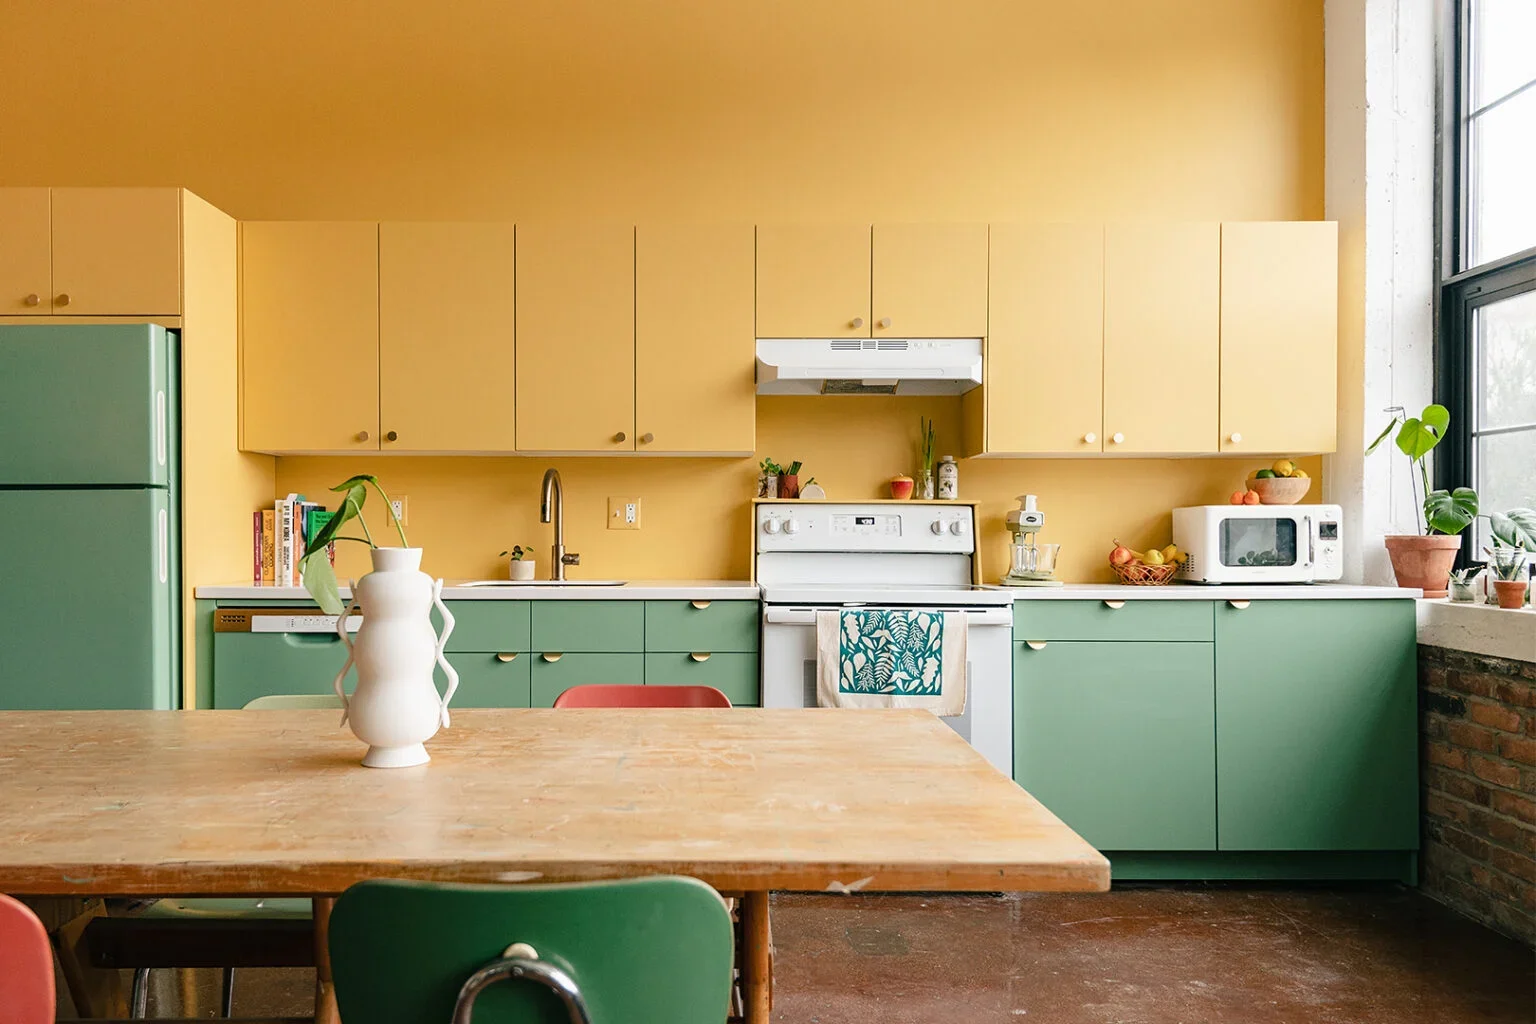 Kitchen painted with yellow cabinets on top and sage green cabinets on the bottom.